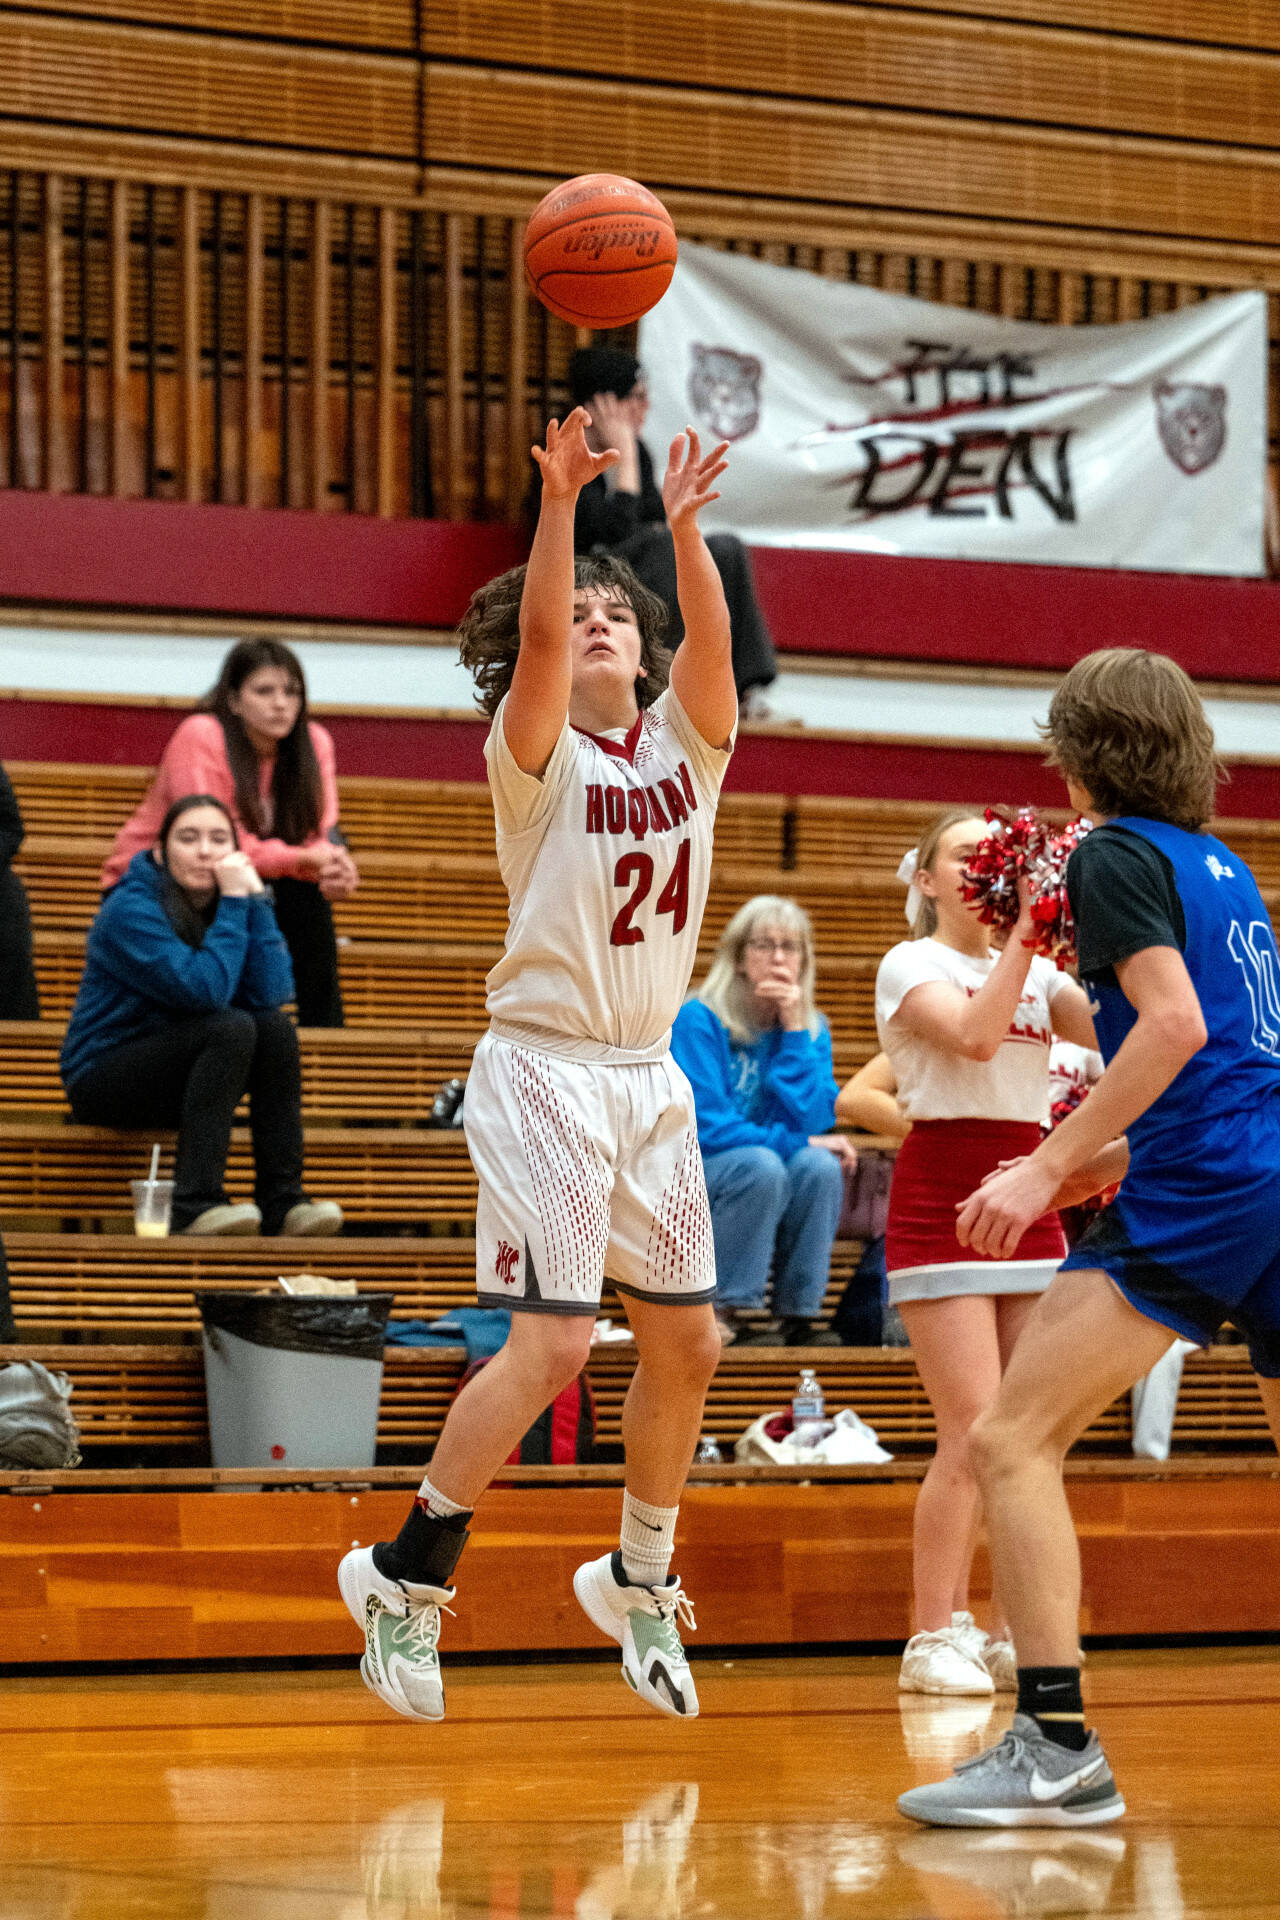 PHOTO BY FOREST WORGUM High-scoring Hoquiam freshman point guard Lincoln Niemi was named to the 1A Evergreen League First Team after averaging just under 20 points per game this season.